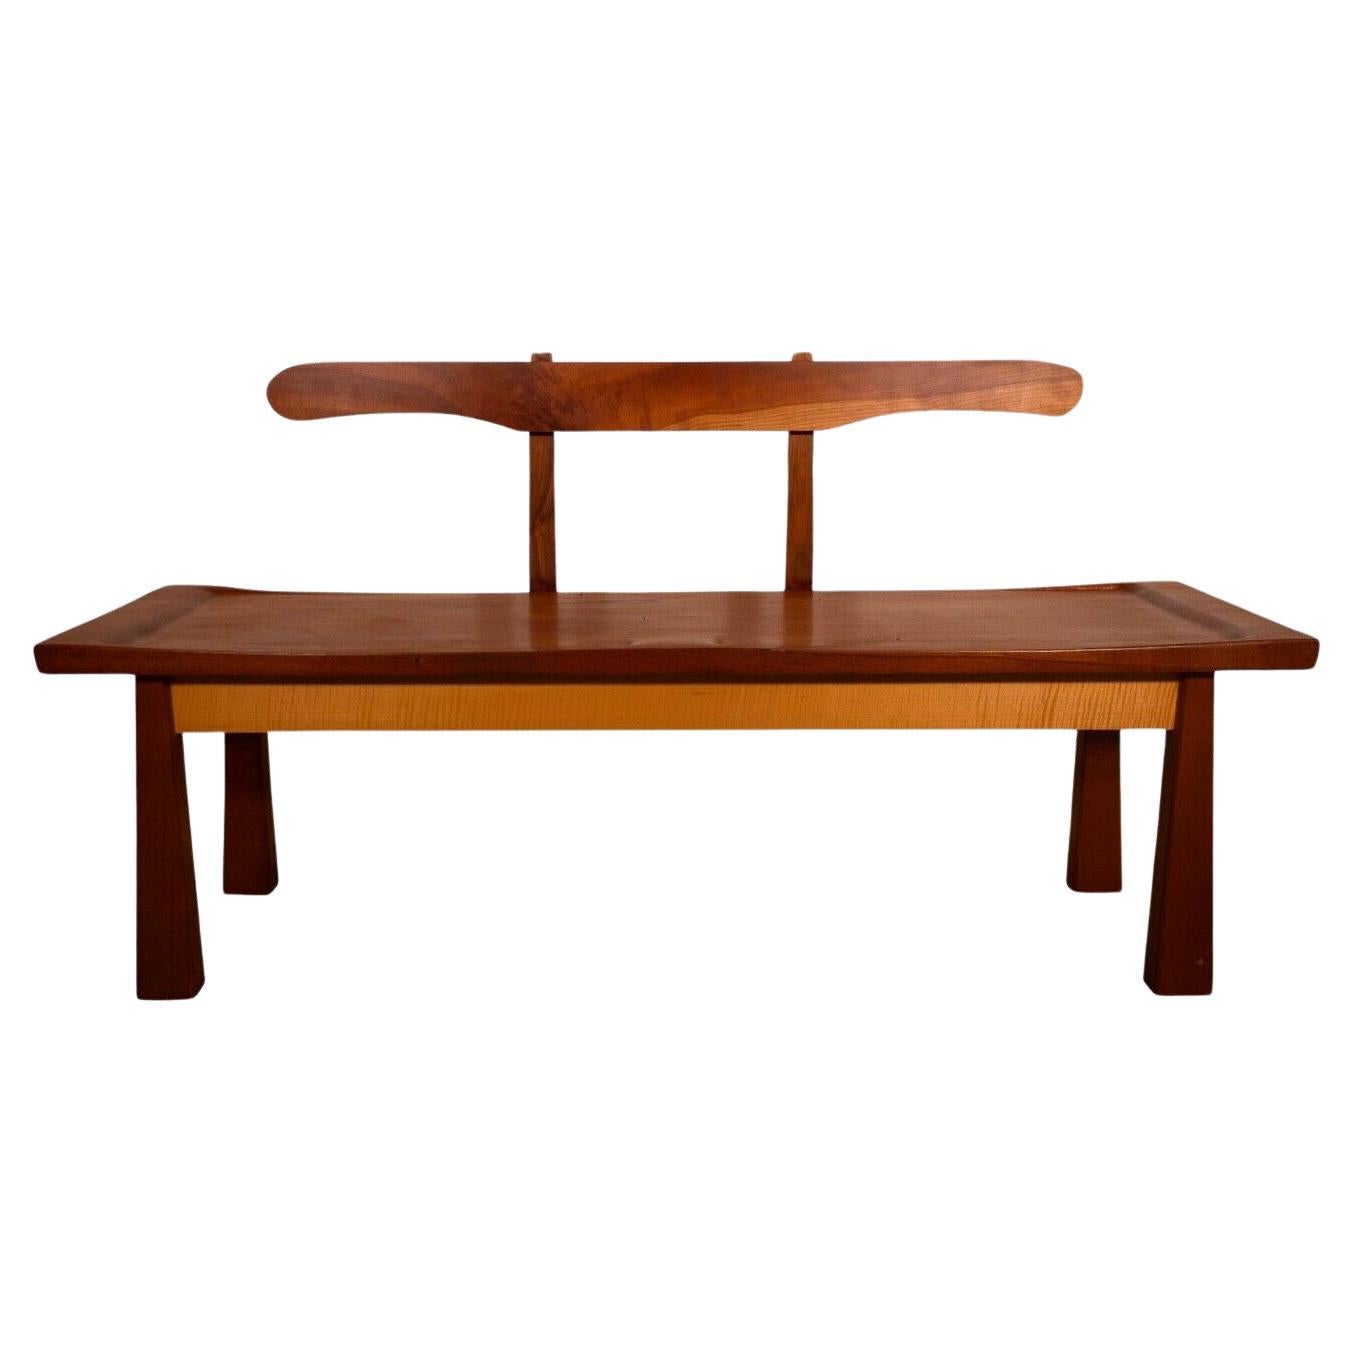 Nakashima Styled Wooden Bench with Divided Seats Signed Mid Century Modern